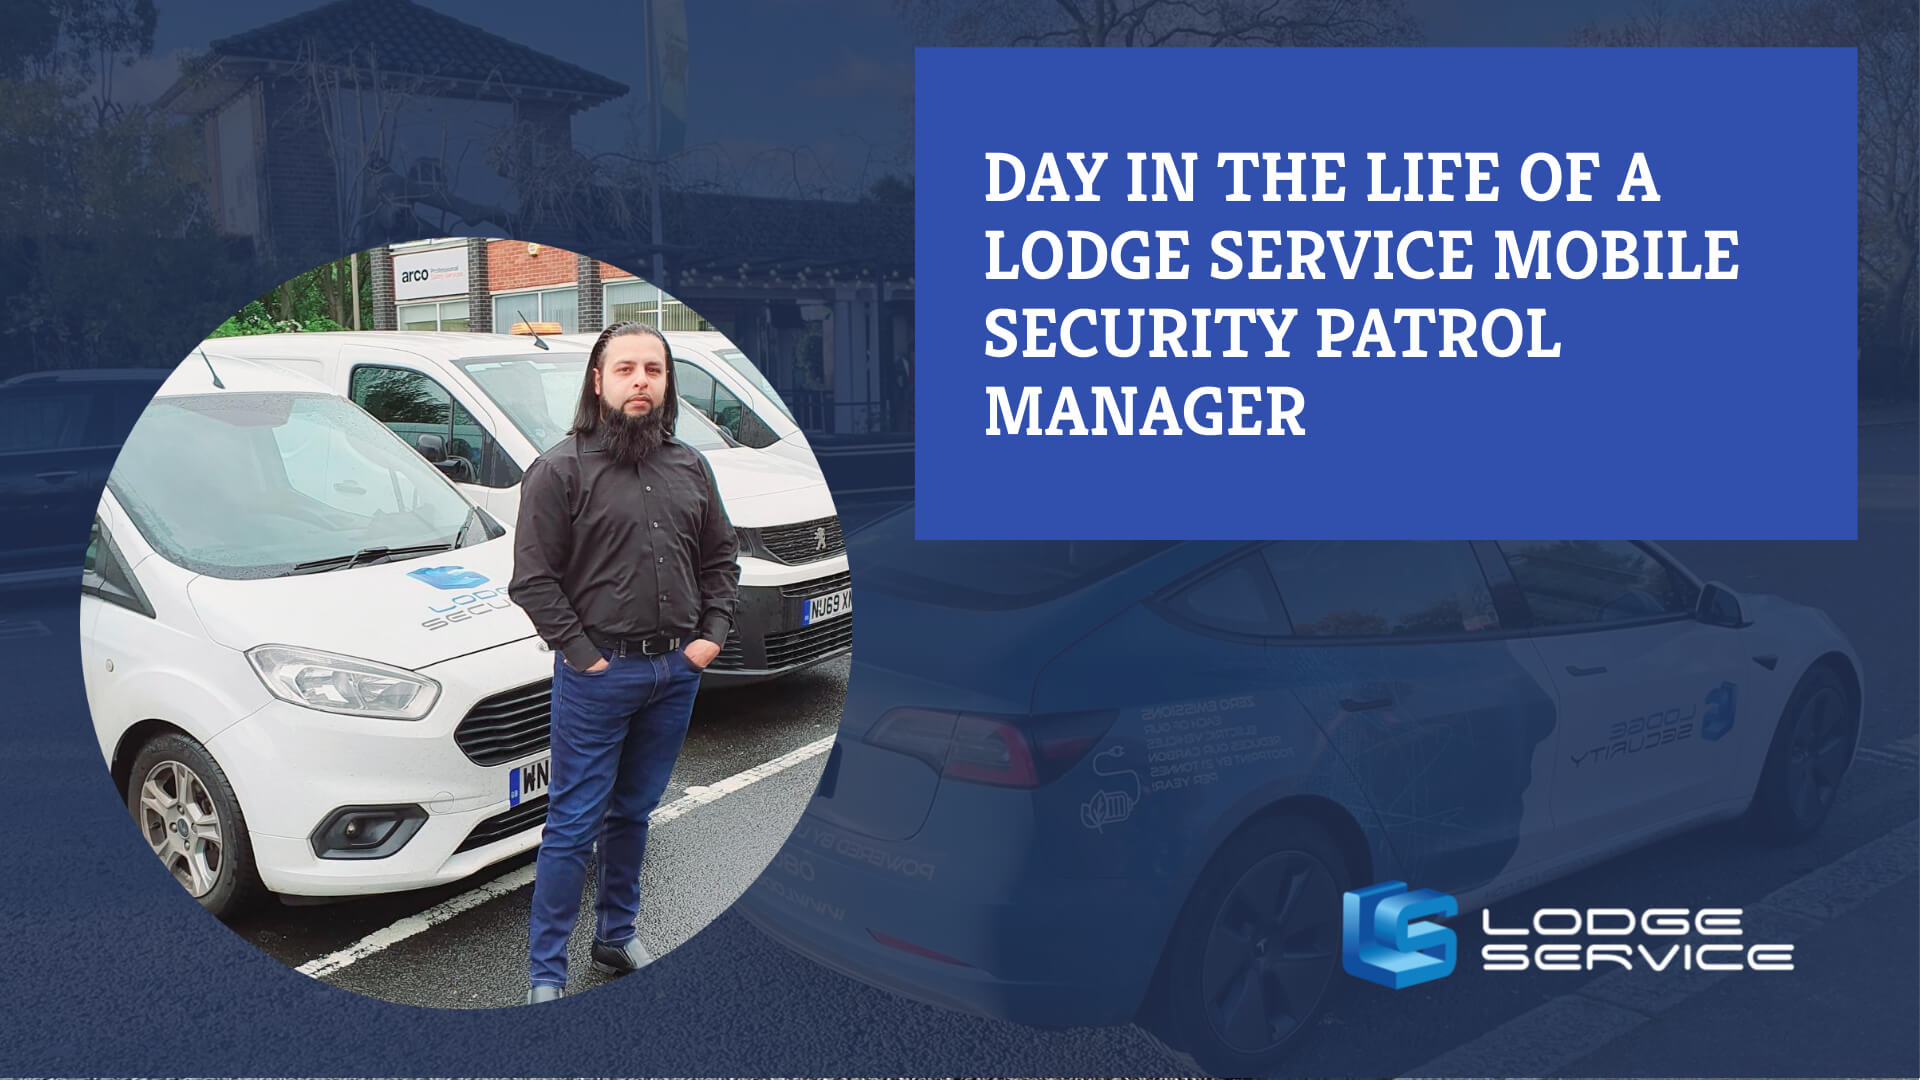 Day in the life of a Lodge Service Mobile Security Patrol Supervisor